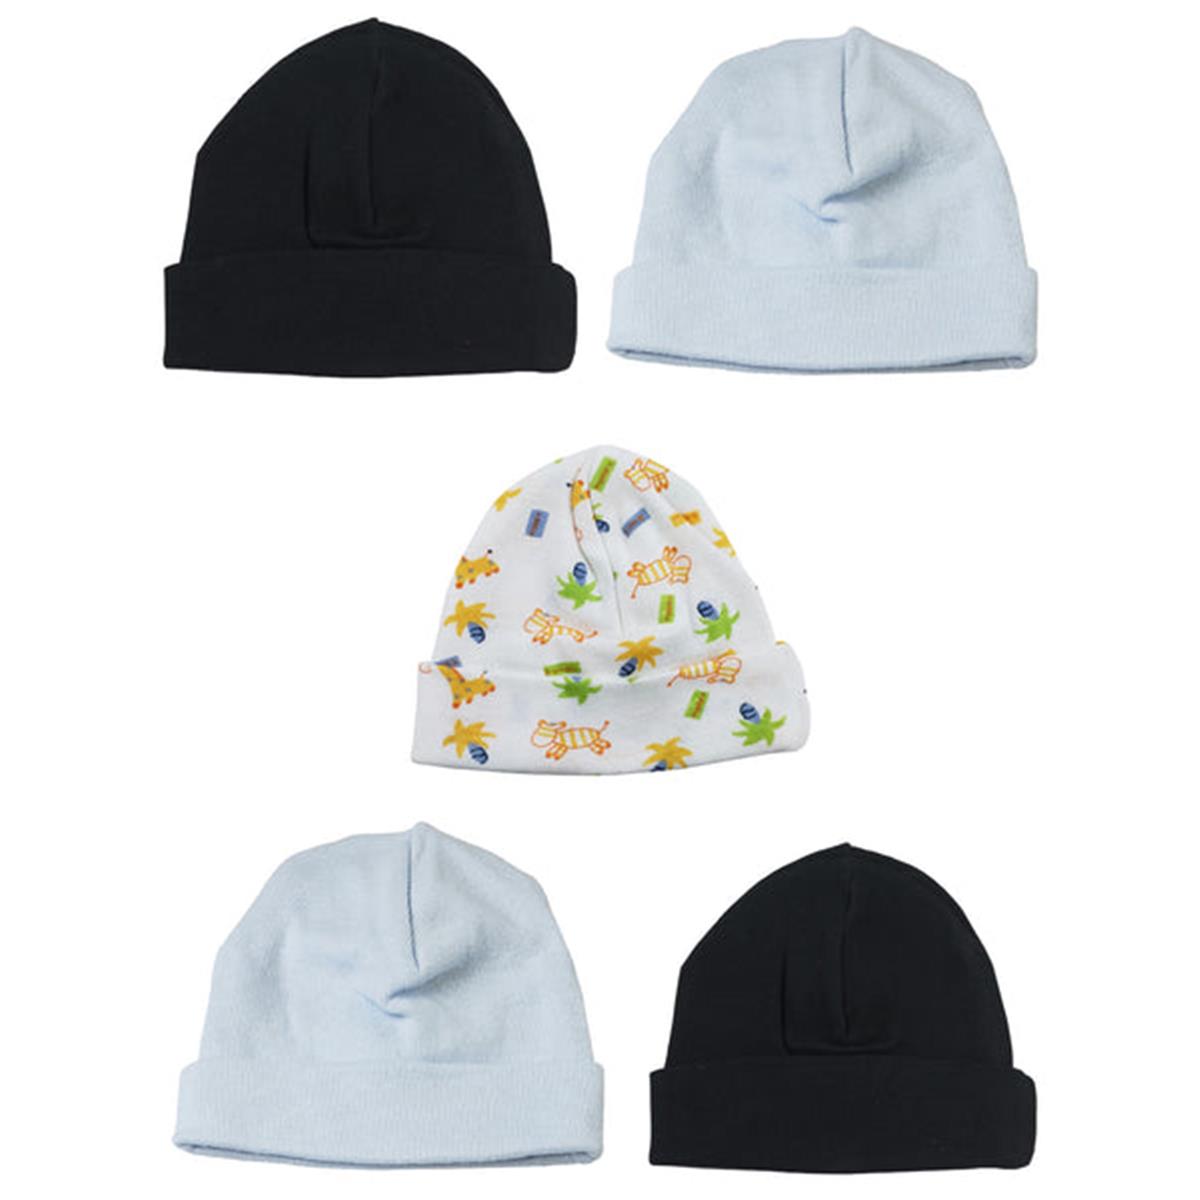 Picture of Bambini LS-0461 Boys Baby Caps - Blue&#44; Black & Print - One Size - 5 per Pack